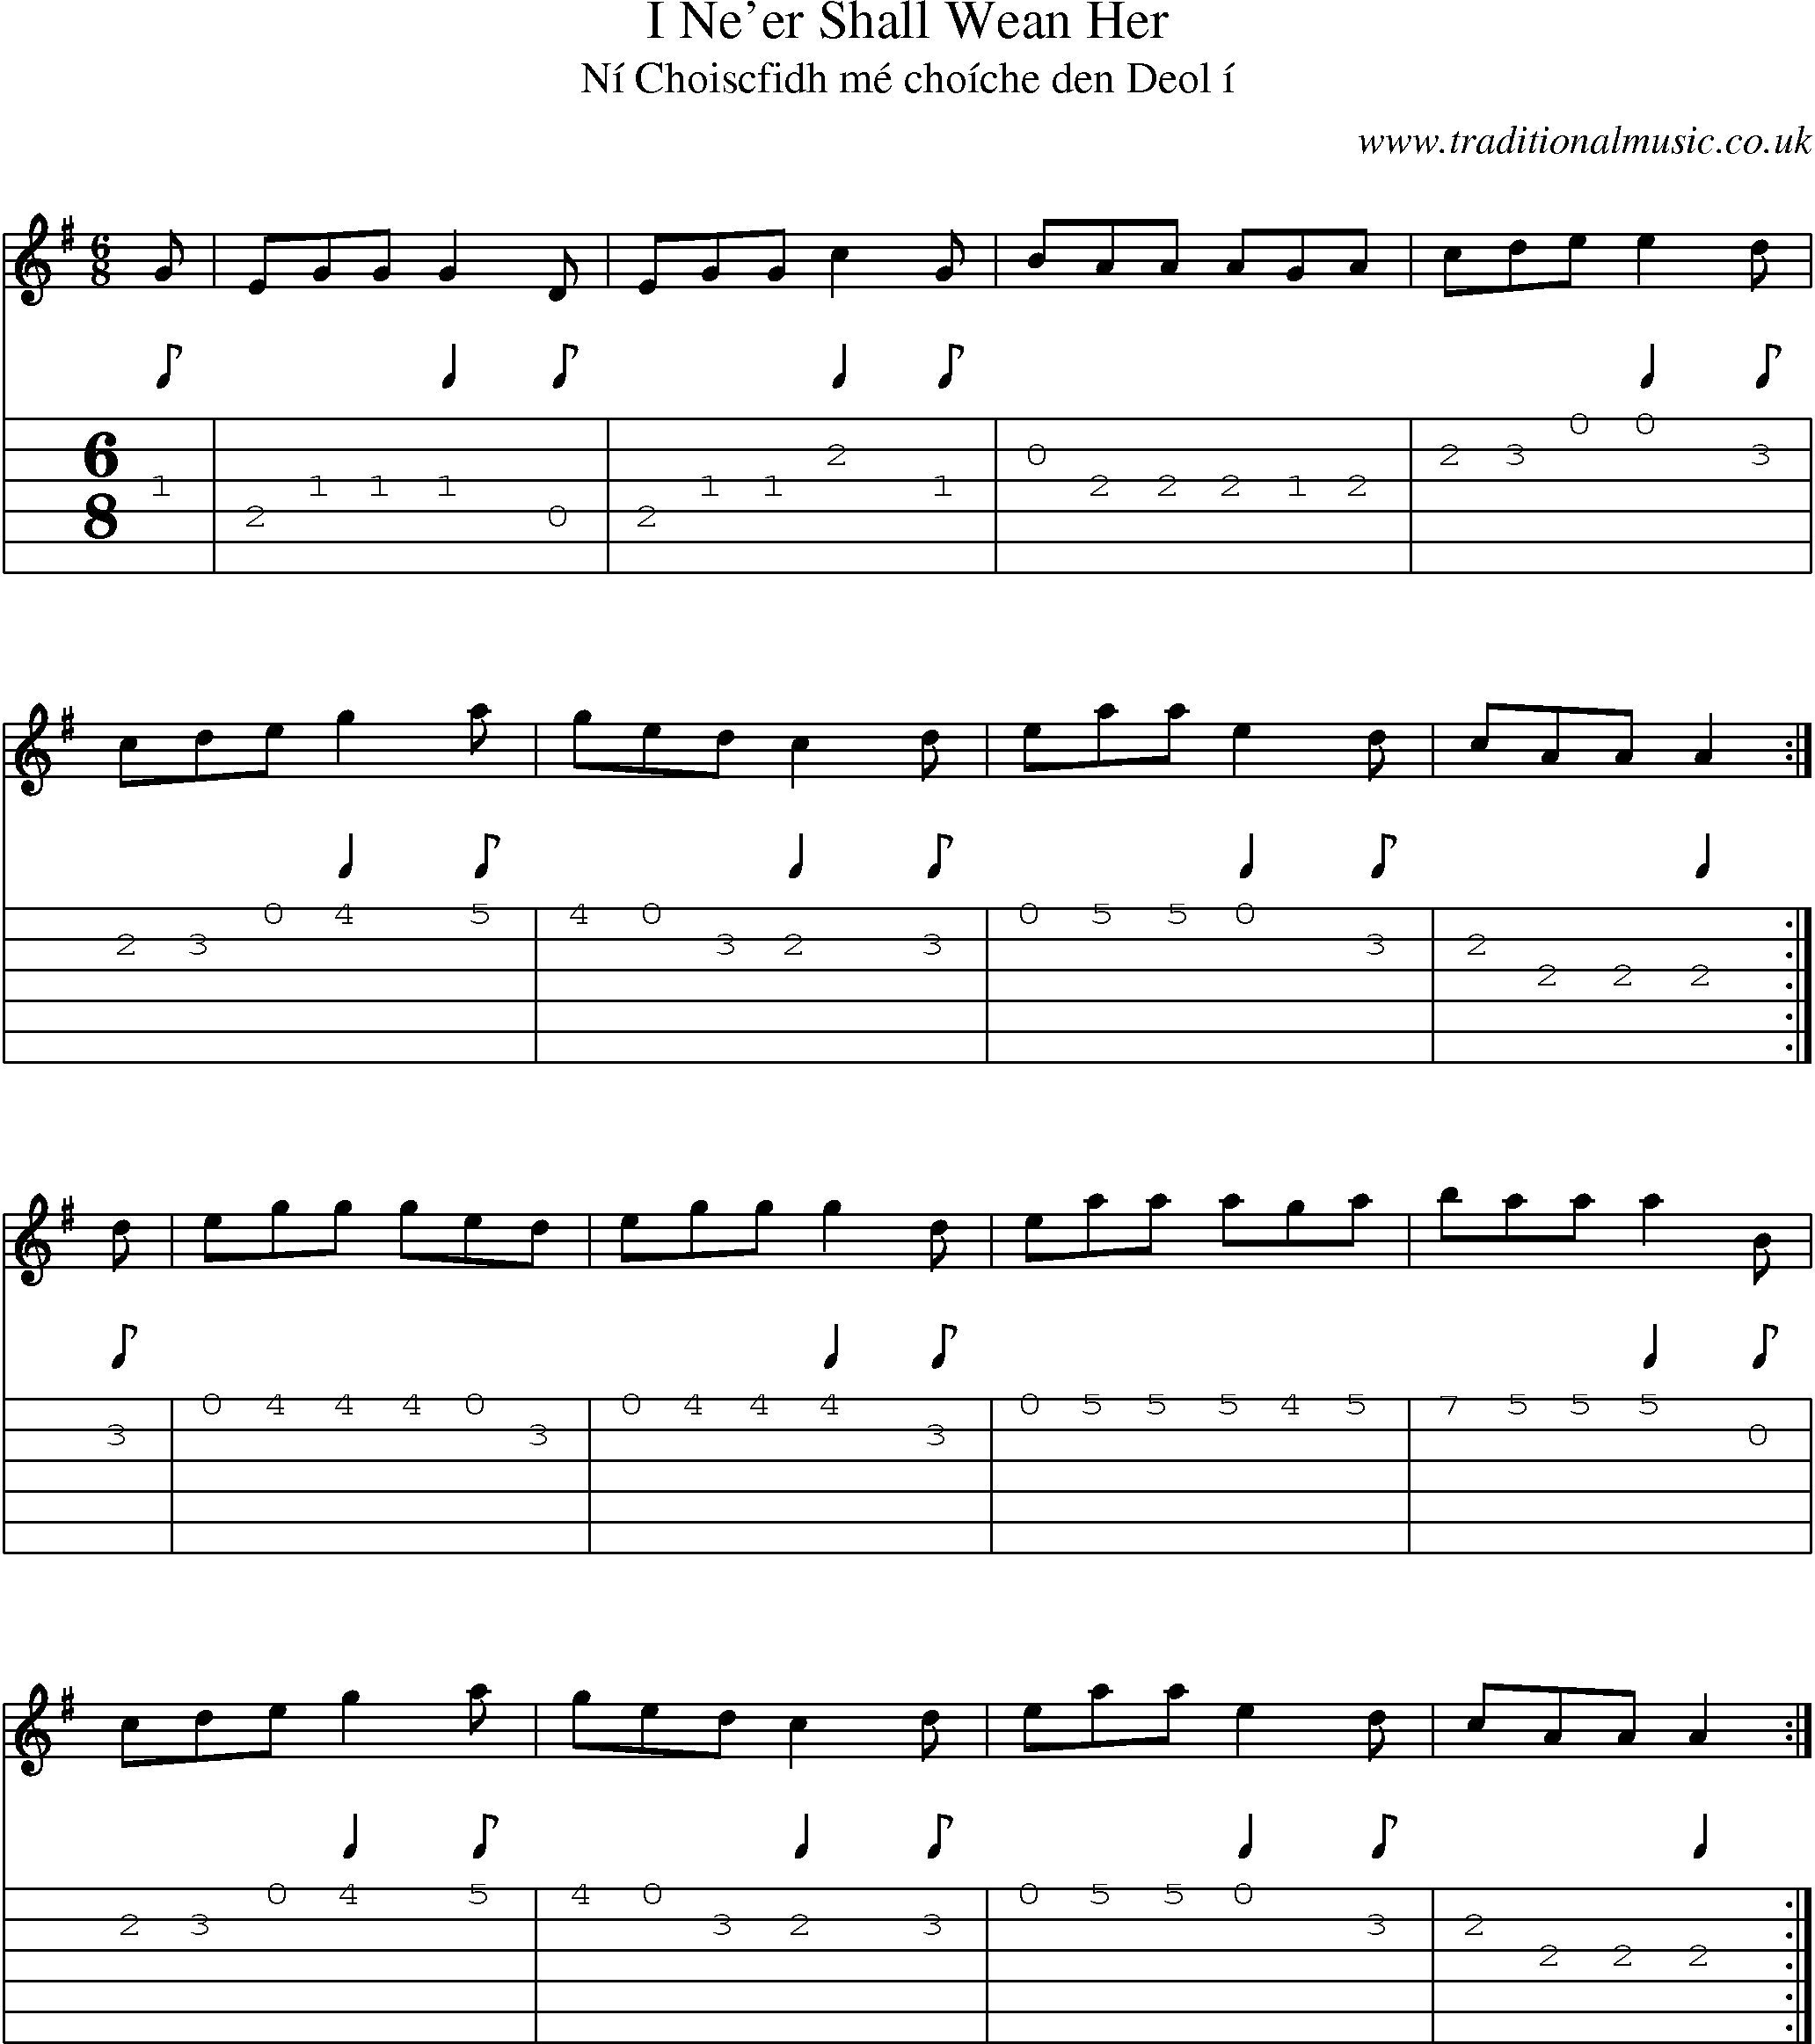 Music Score and Guitar Tabs for I Neer Shall Wean Her